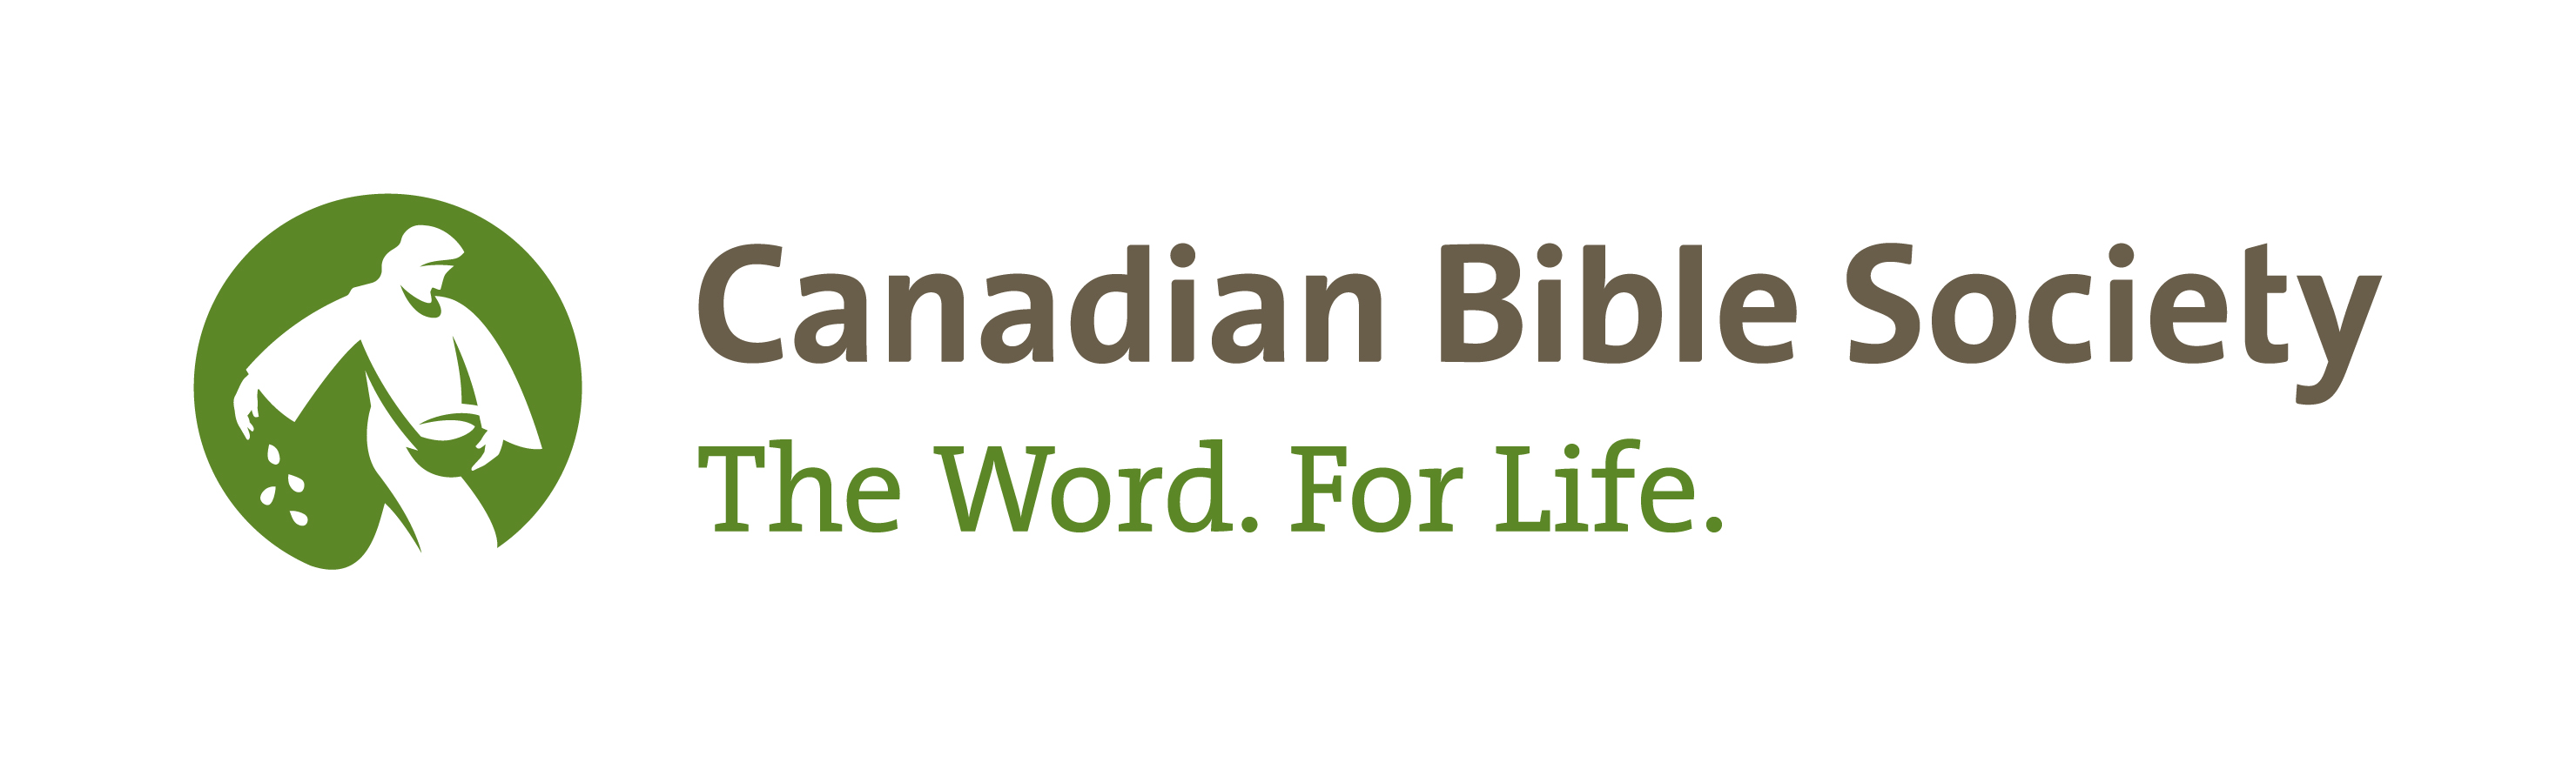 Canadian Bible Society The Word. For Life.